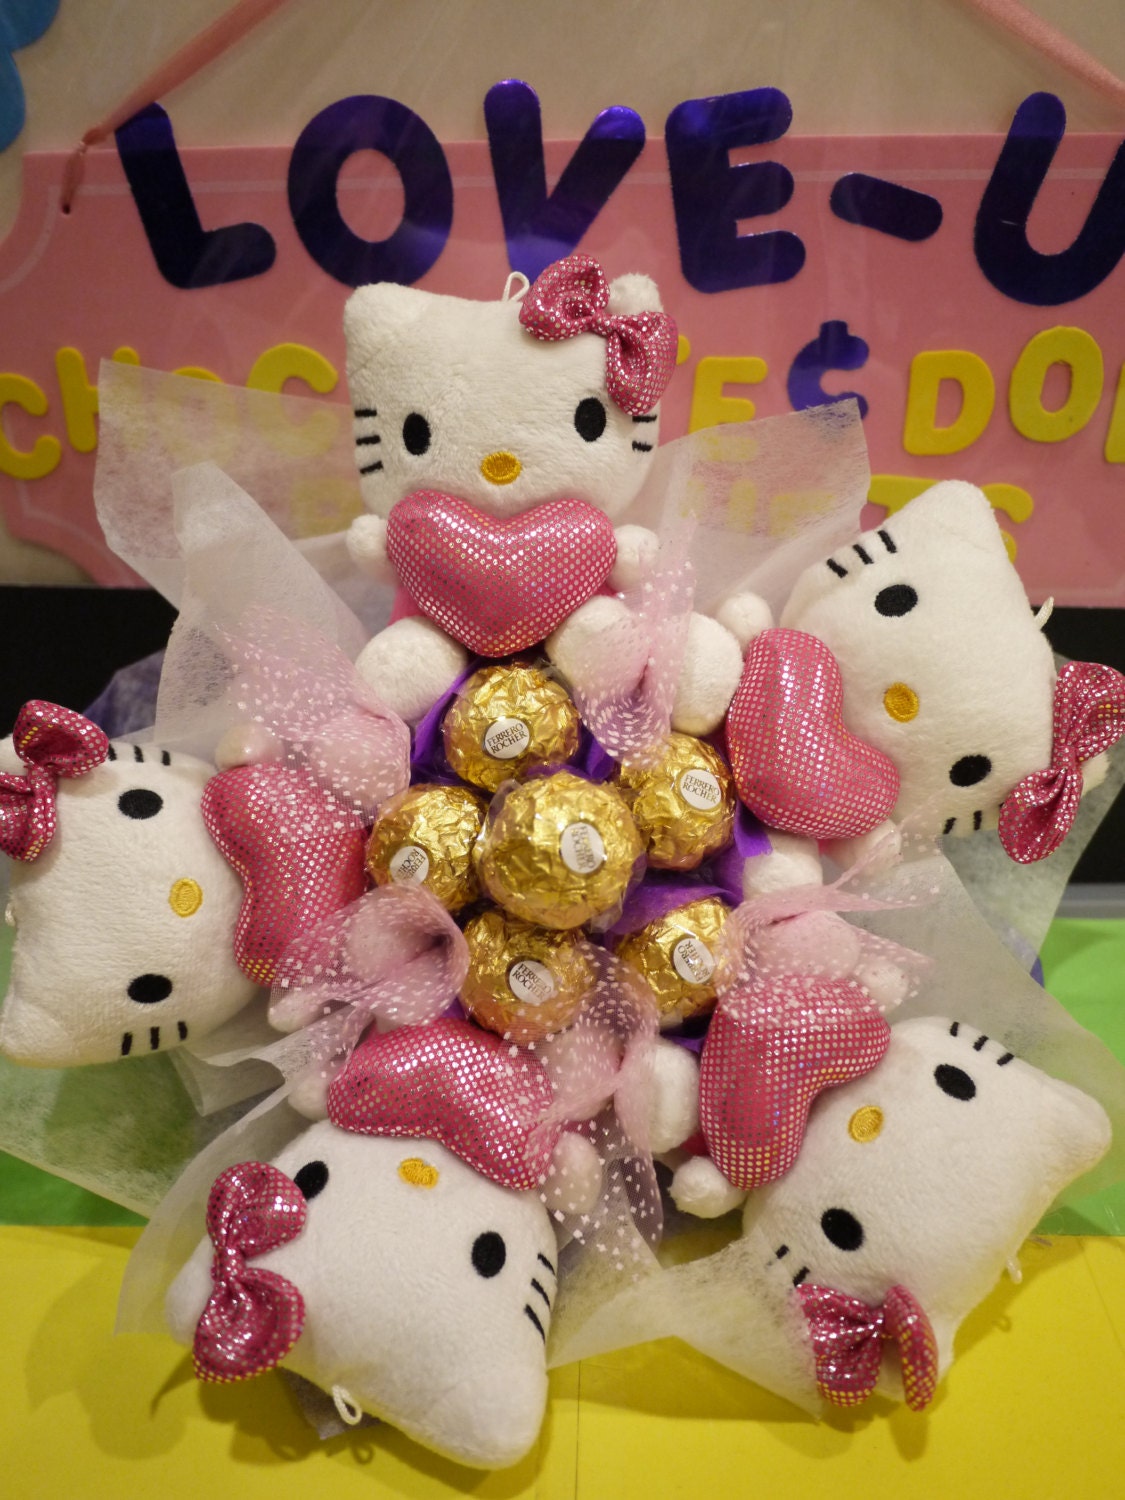 Hello Kitty Plush doll flower bouquet with Ferrero Rocher chocolates. *** Great for japanese cartoon fans!